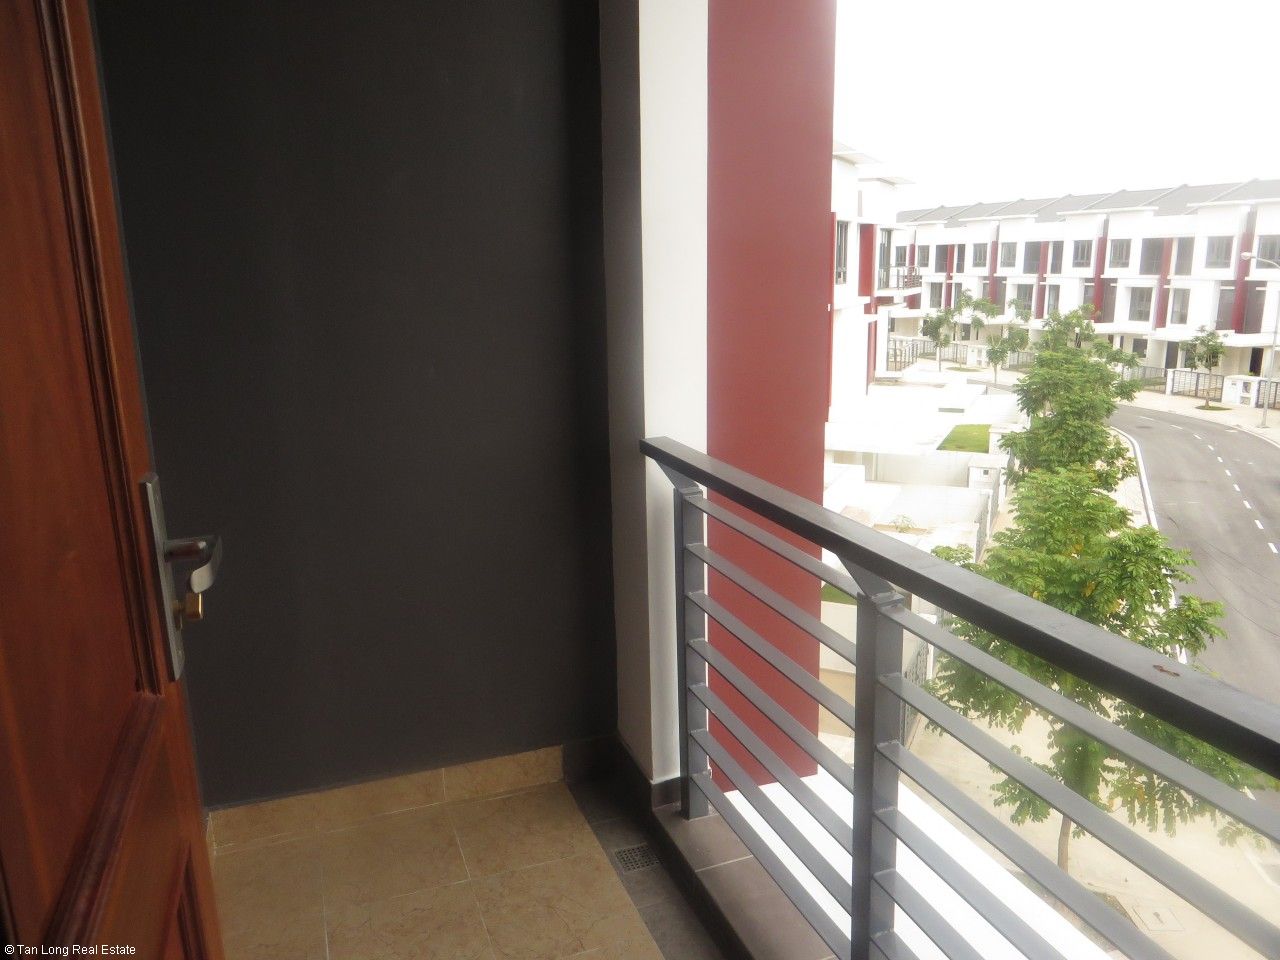 House in Gamuda, Hoang Mai district, Ha Noi for rent. 2